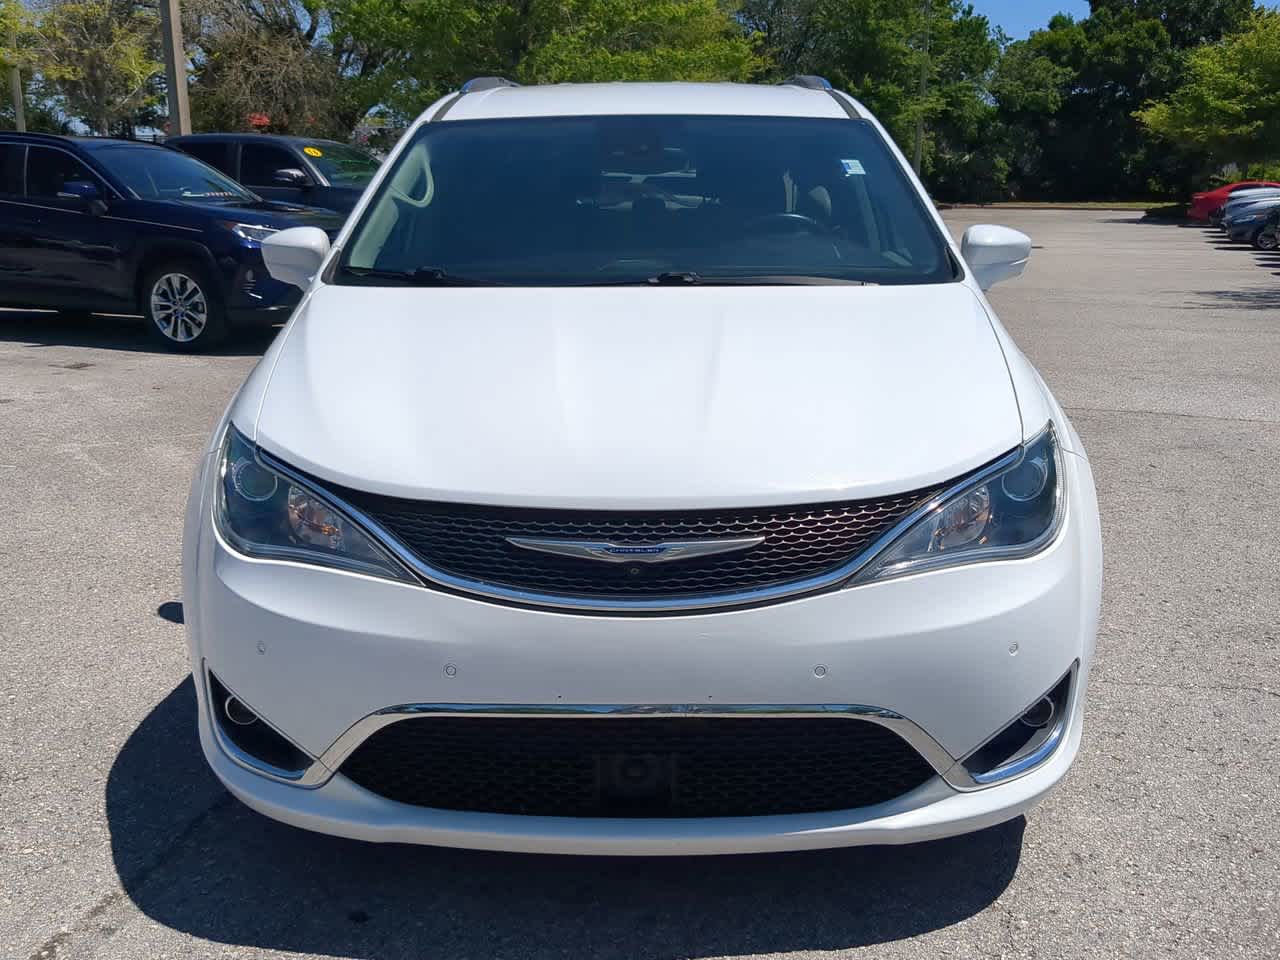 2018 Chrysler Pacifica Touring 9